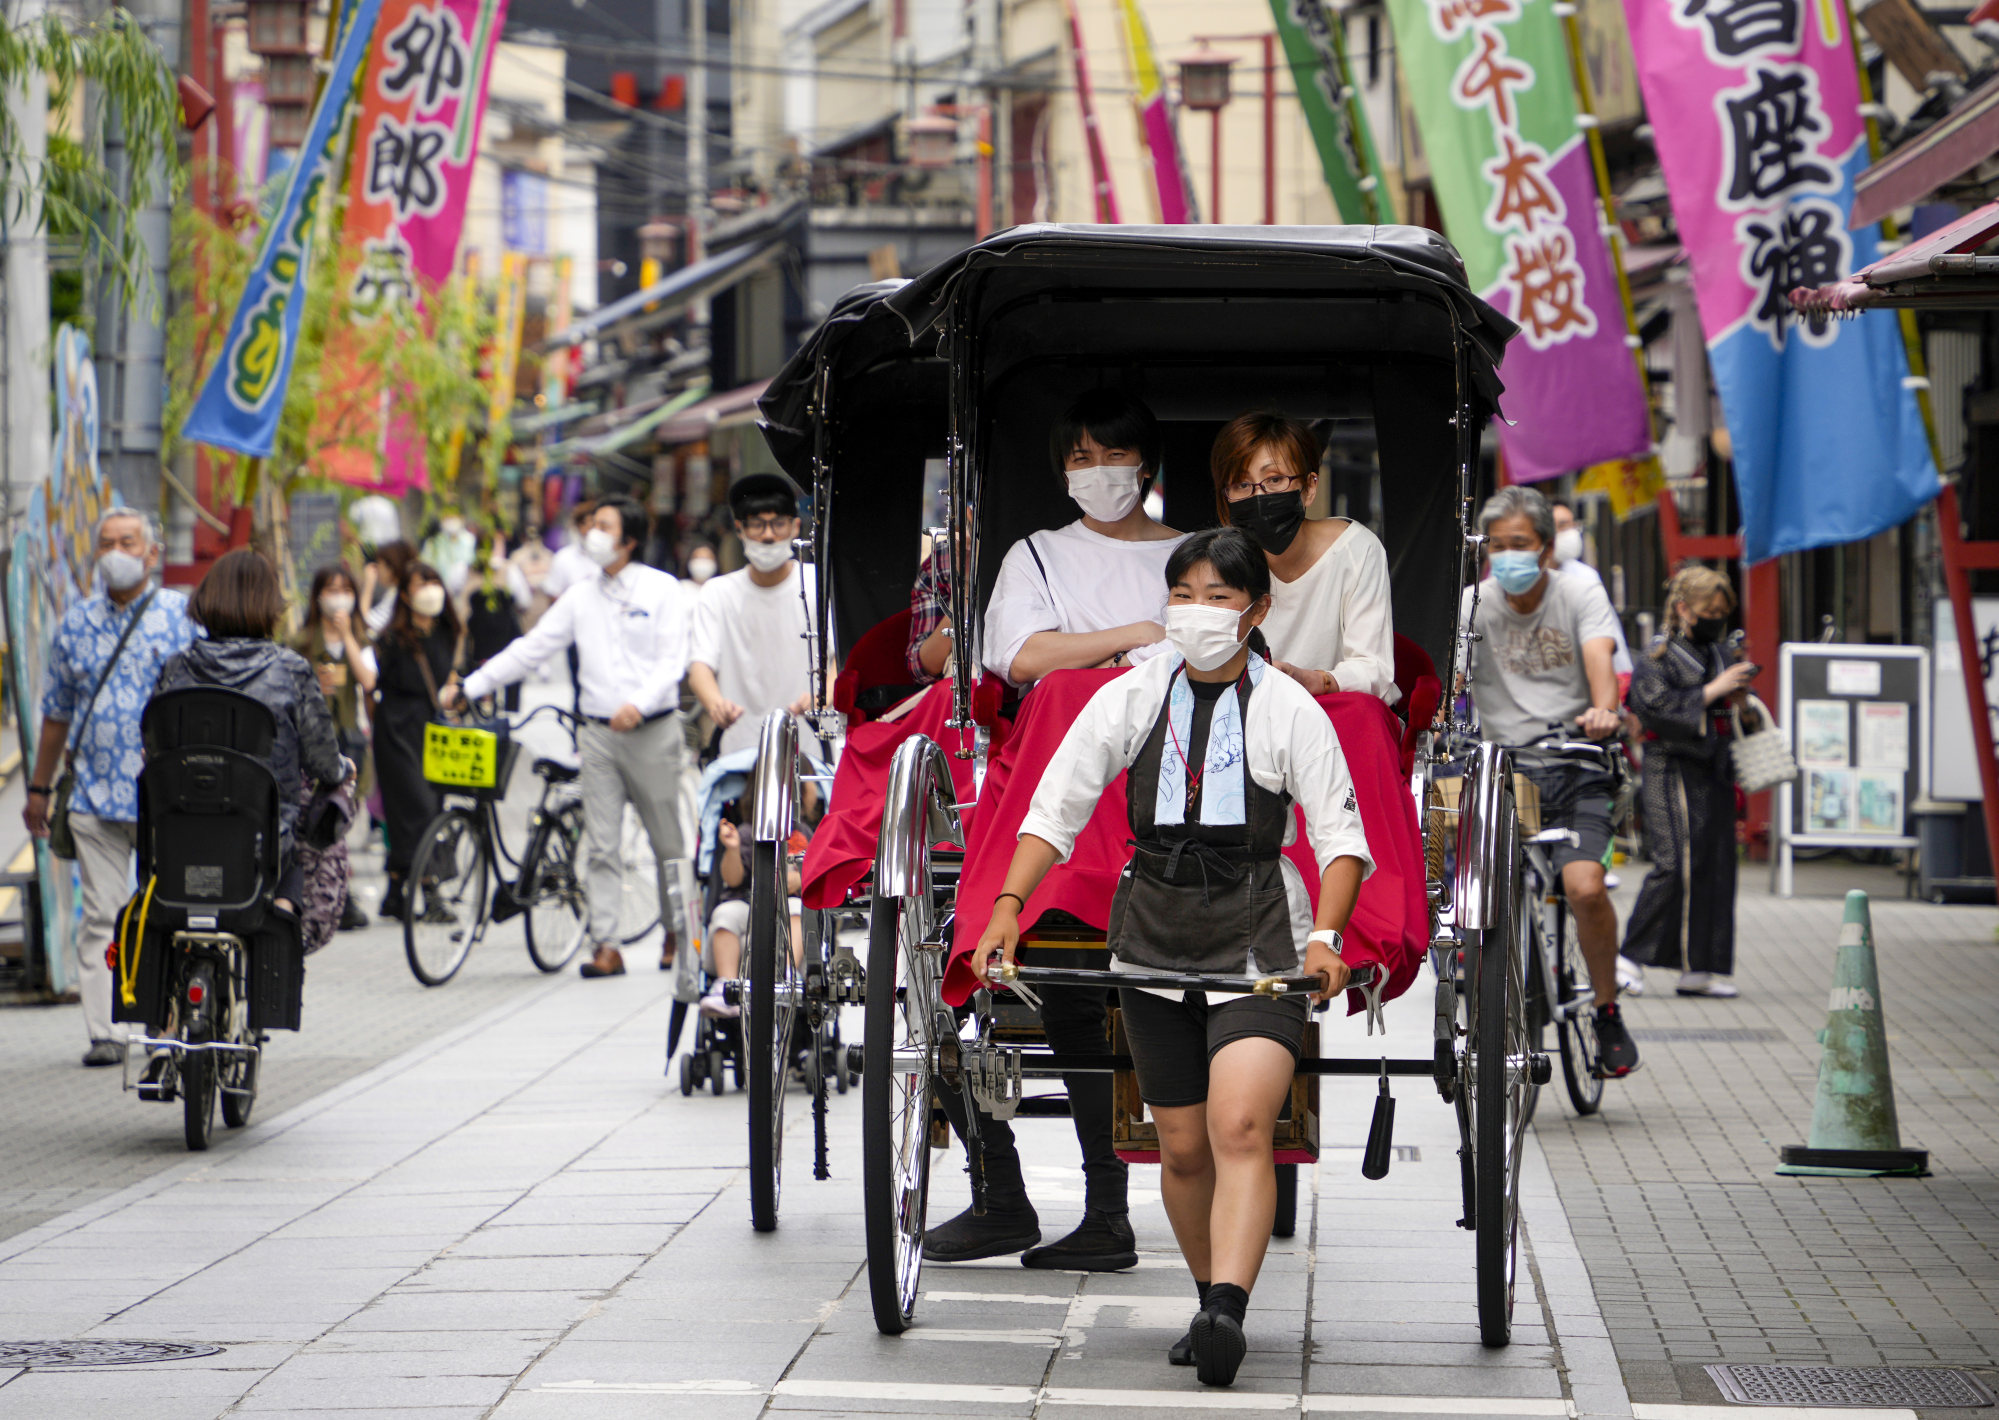 Tourists enjoy a rickshaw ride in Tokyo’s Asakusa district after Japan eased it Covid-19 rules this month. Photo: EPA-EFE